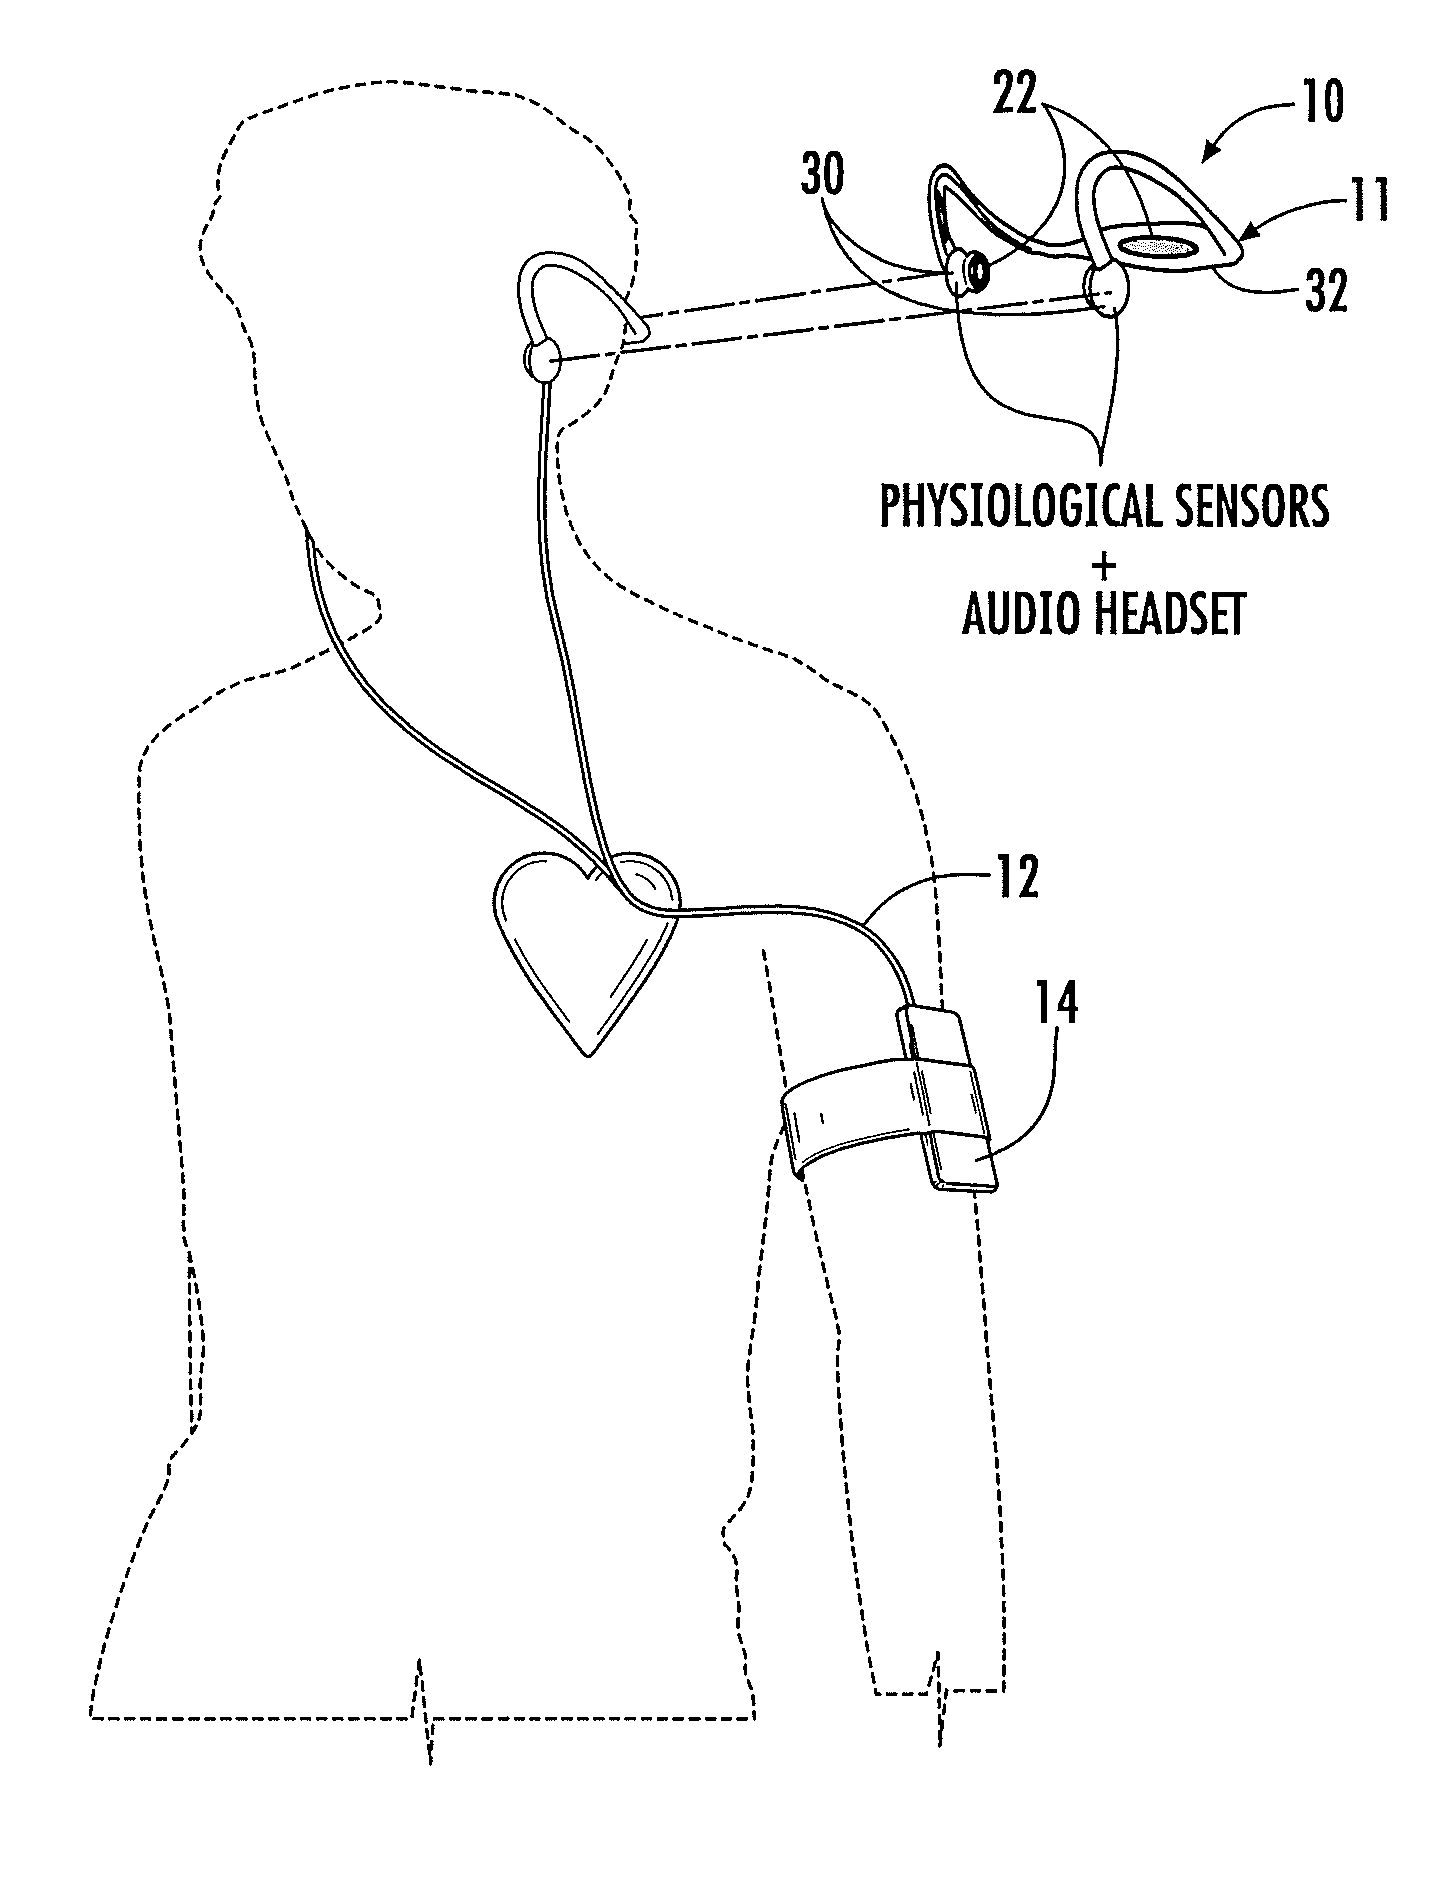 Methods and Apparatus for Measuring Physiological Conditions